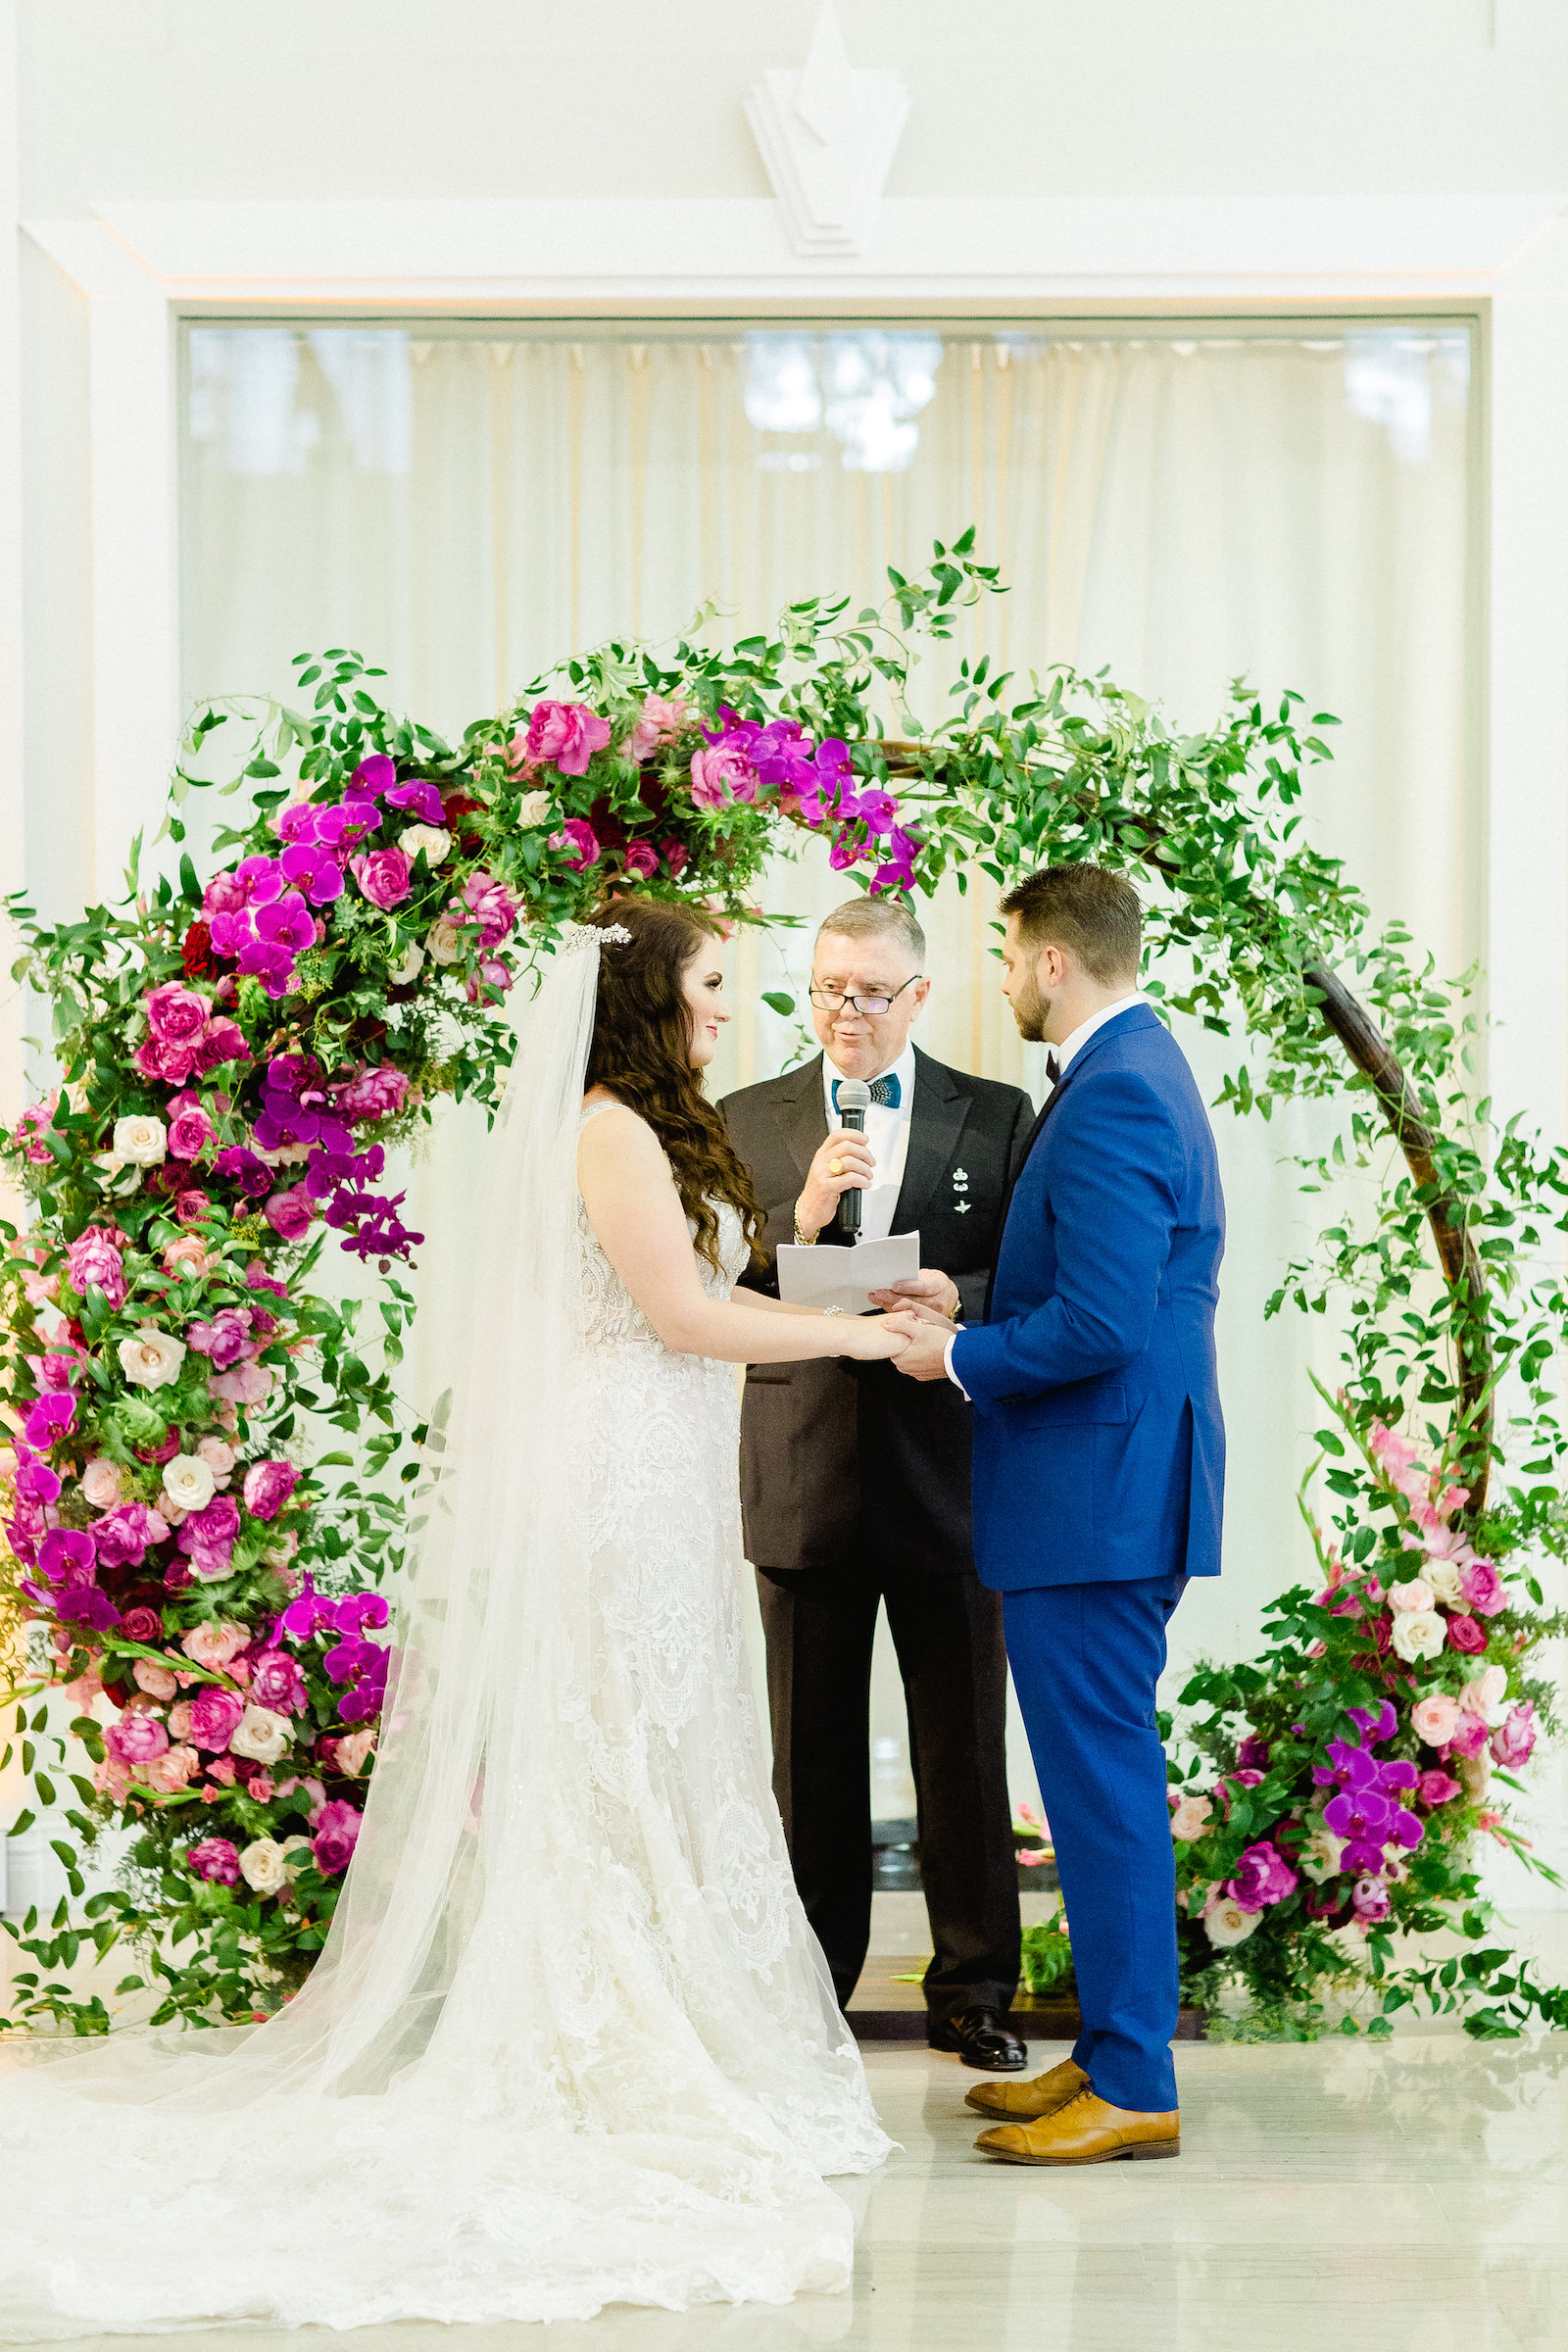 Bride and Groom Exchanging Vows at Indoor Downtown Tampa Wedding Ceremony at Tampa Wedding Venue The Vault | Bright Colorful Florida Wedding Ceremony Floral Circle Moon Round Arch with Pink Roses and Purple Orchids and Greenery | Groom Wearing Classic Blue Suit